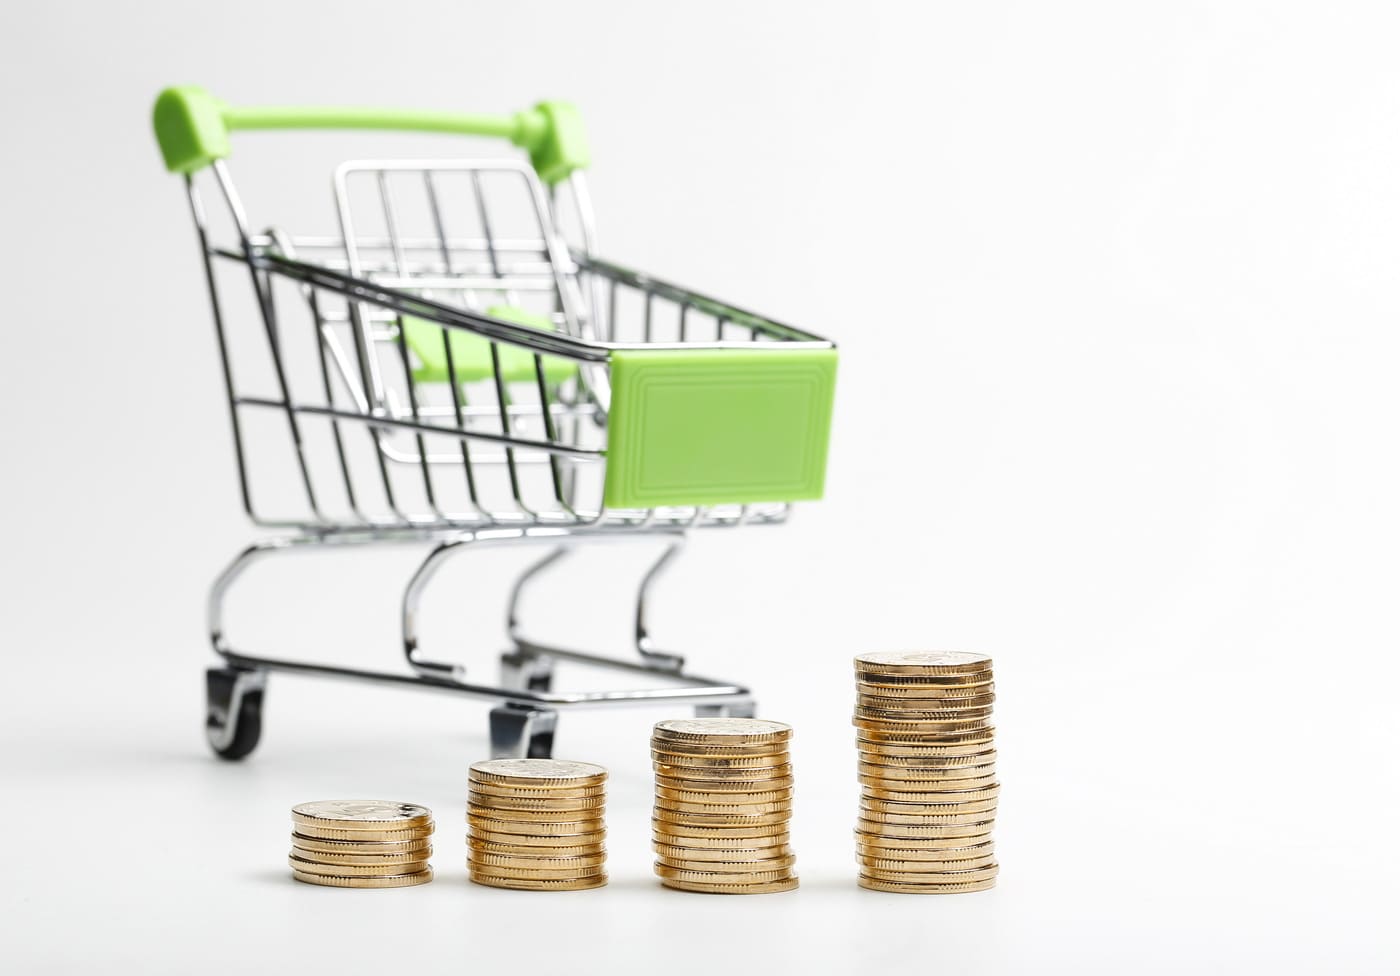 coins-pile-shopping-cart-white-background (1)